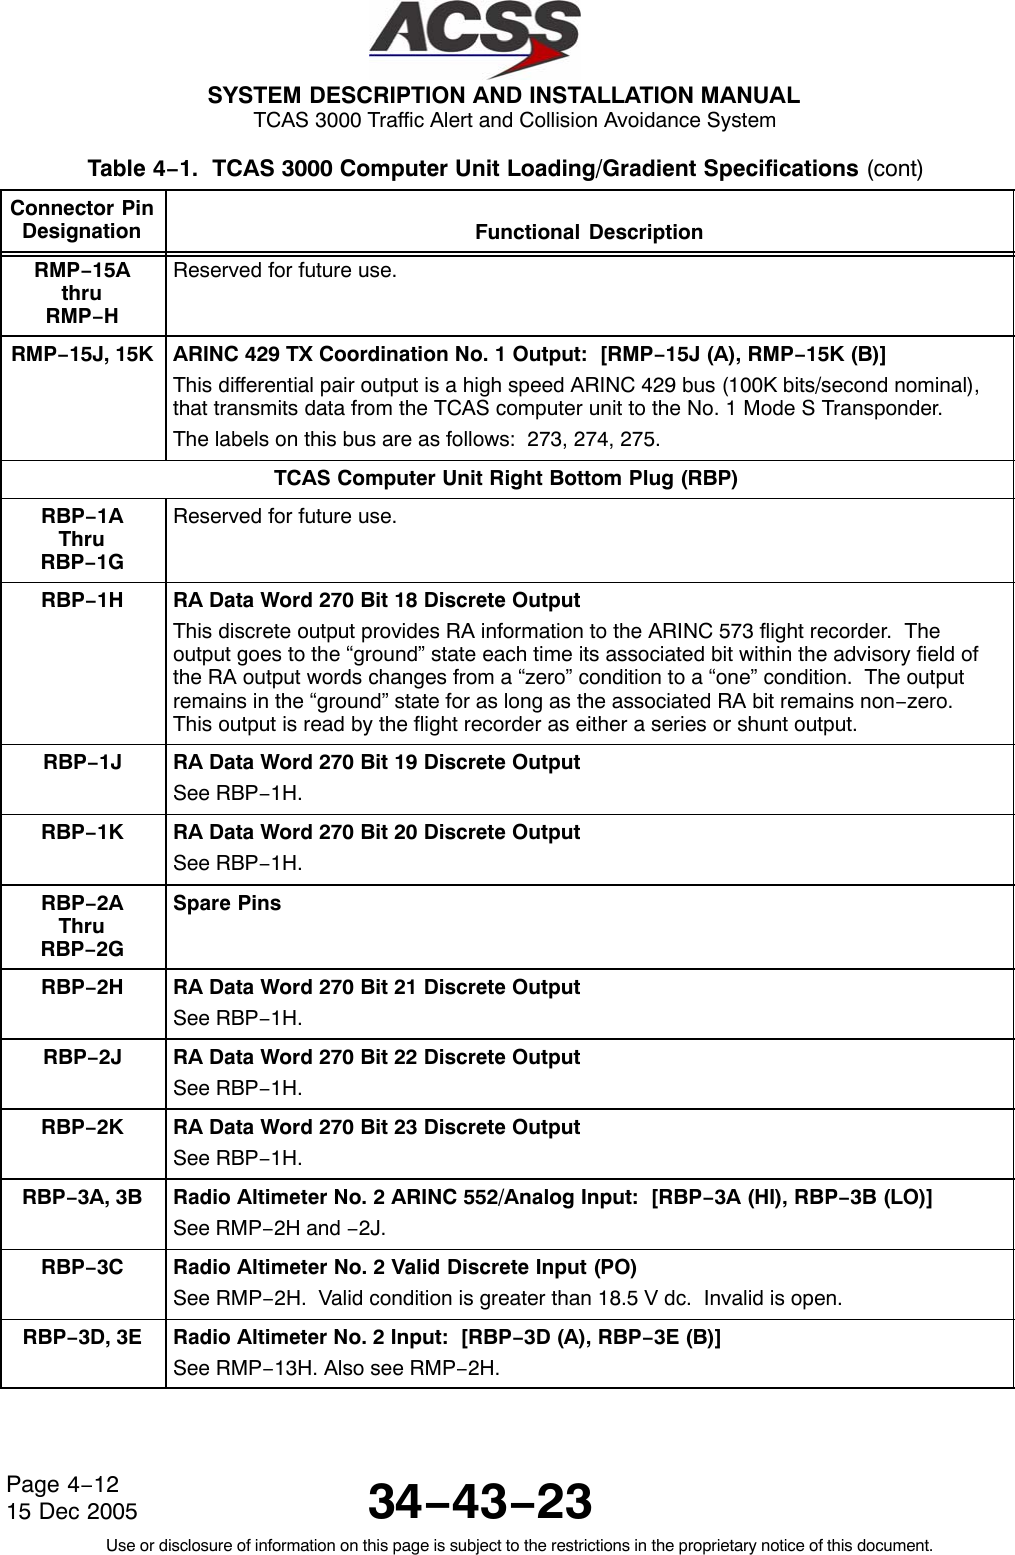  SYSTEM DESCRIPTION AND INSTALLATION MANUAL TCAS 3000 Traffic Alert and Collision Avoidance System34−43−23Use or disclosure of information on this page is subject to the restrictions in the proprietary notice of this document.Page 4−1215 Dec 2005Table 4−1.  TCAS 3000 Computer Unit Loading/Gradient Specifications (cont)Connector PinDesignation Functional DescriptionRMP−15AthruRMP−HReserved for future use.RMP−15J, 15K ARINC 429 TX Coordination No. 1 Output:  [RMP−15J (A), RMP−15K (B)]This differential pair output is a high speed ARINC 429 bus (100K bits/second nominal),that transmits data from the TCAS computer unit to the No. 1 Mode S Transponder.The labels on this bus are as follows:  273, 274, 275.TCAS Computer Unit Right Bottom Plug (RBP)RBP−1AThruRBP−1GReserved for future use.RBP−1H RA Data Word 270 Bit 18 Discrete OutputThis discrete output provides RA information to the ARINC 573 flight recorder.  Theoutput goes to the “ground” state each time its associated bit within the advisory field ofthe RA output words changes from a “zero” condition to a “one” condition.  The outputremains in the “ground” state for as long as the associated RA bit remains non−zero.This output is read by the flight recorder as either a series or shunt output.RBP−1J RA Data Word 270 Bit 19 Discrete OutputSee RBP−1H.RBP−1K RA Data Word 270 Bit 20 Discrete OutputSee RBP−1H.RBP−2AThruRBP−2GSpare PinsRBP−2H RA Data Word 270 Bit 21 Discrete OutputSee RBP−1H.RBP−2J RA Data Word 270 Bit 22 Discrete OutputSee RBP−1H.RBP−2K RA Data Word 270 Bit 23 Discrete OutputSee RBP−1H.RBP−3A, 3B Radio Altimeter No. 2 ARINC 552/Analog Input:  [RBP−3A (HI), RBP−3B (LO)]See RMP−2H and −2J.RBP−3C Radio Altimeter No. 2 Valid Discrete Input (PO)See RMP−2H.  Valid condition is greater than 18.5 V dc.  Invalid is open.RBP−3D, 3E Radio Altimeter No. 2 Input:  [RBP−3D (A), RBP−3E (B)]See RMP−13H. Also see RMP−2H.